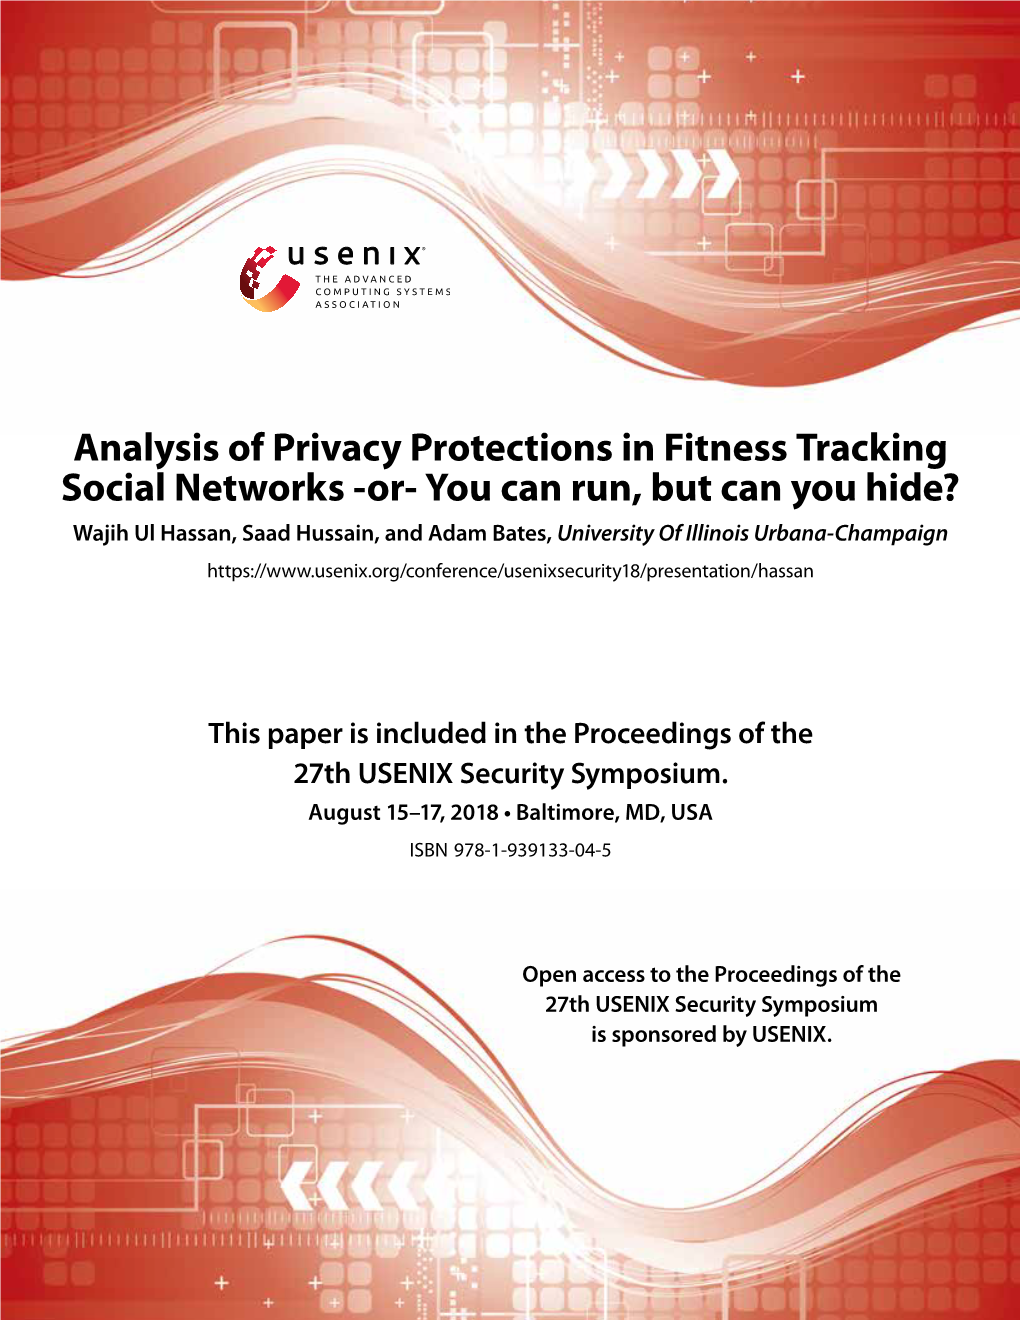 Analysis of Privacy Protections in Fitness Tracking Social Networks